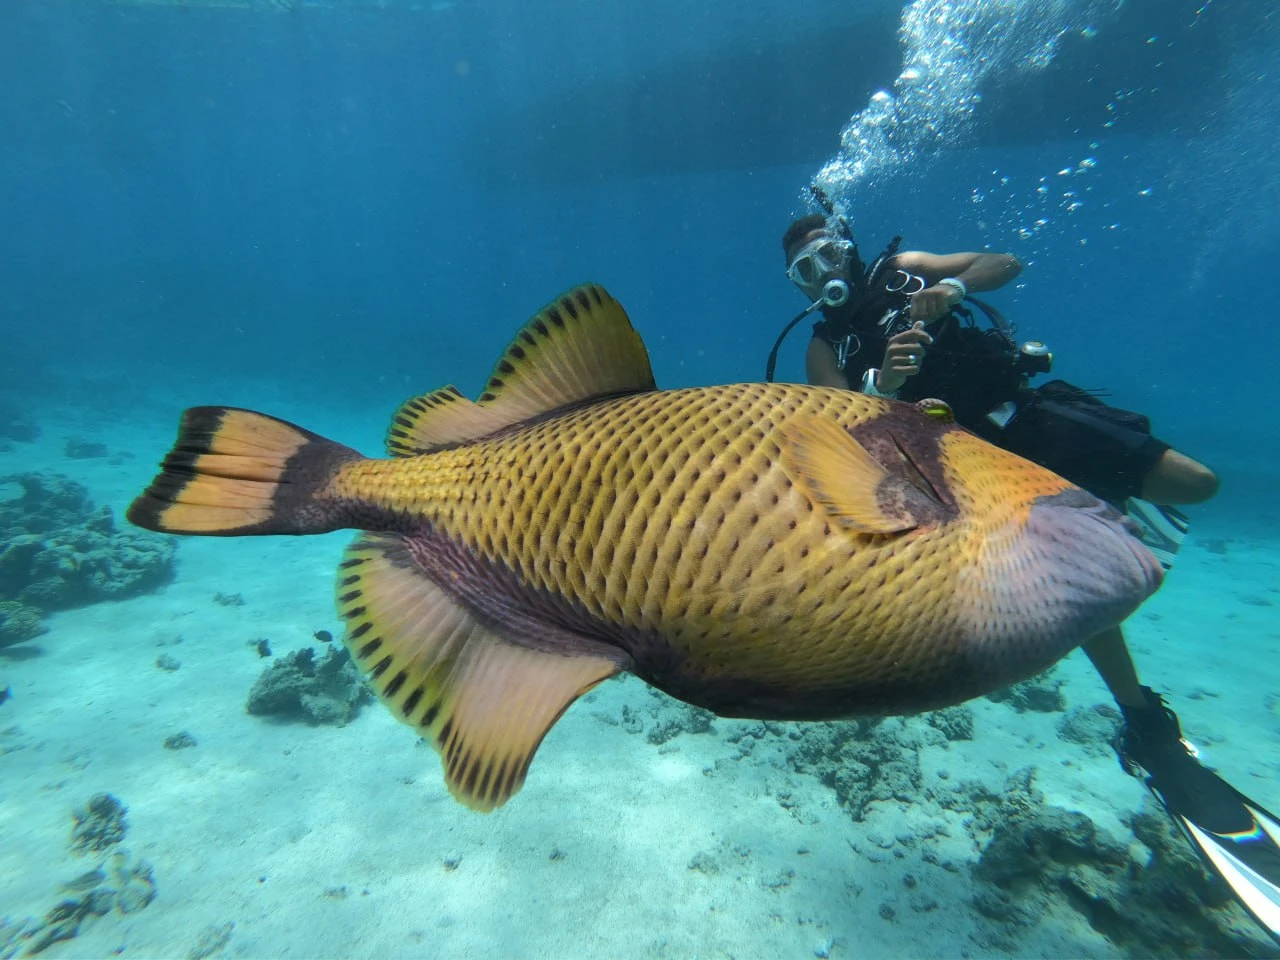 A large, colorful triggerfish with a patterned body swimming close to a diver with a camera in the clear ocean.